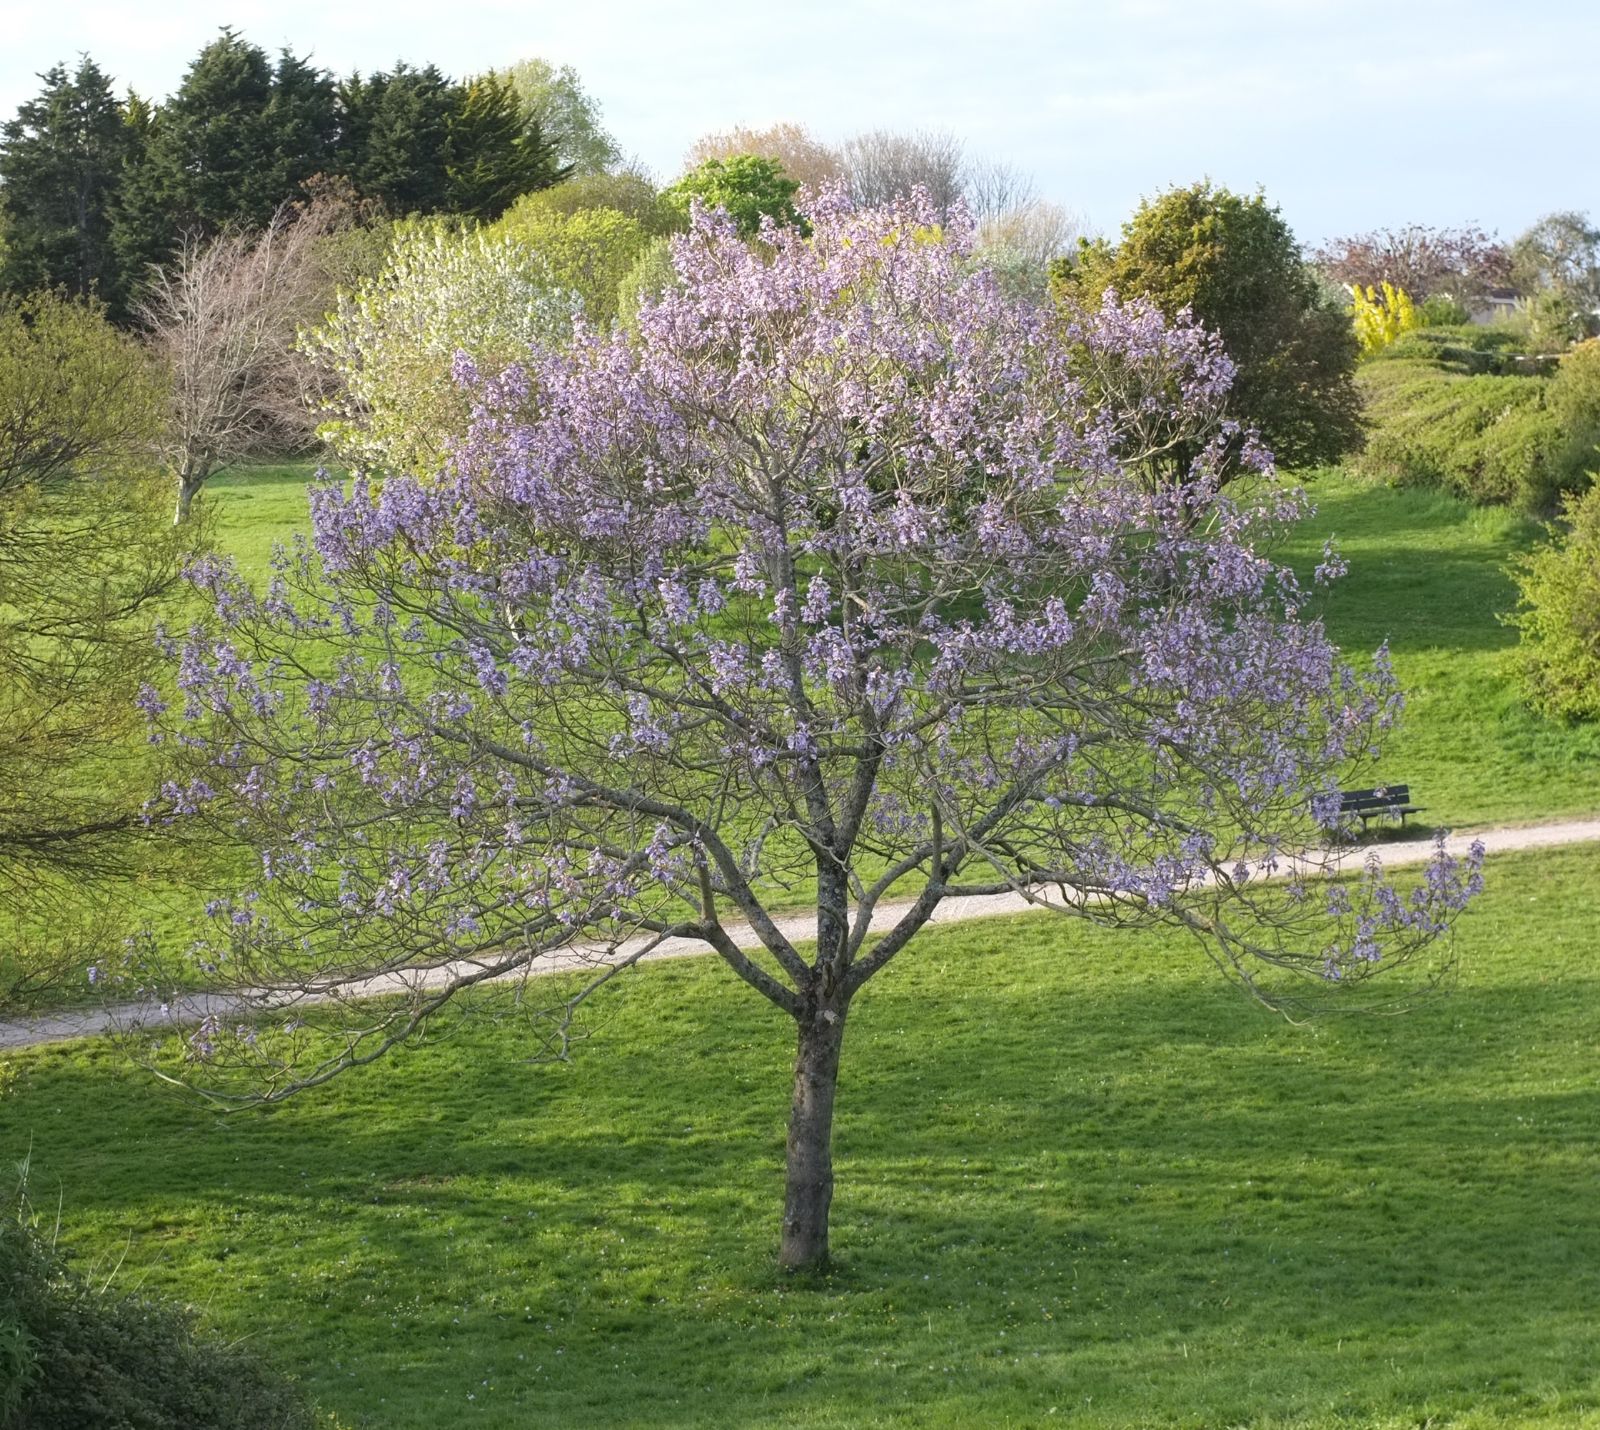 The rediscovery of the Paulownia tree